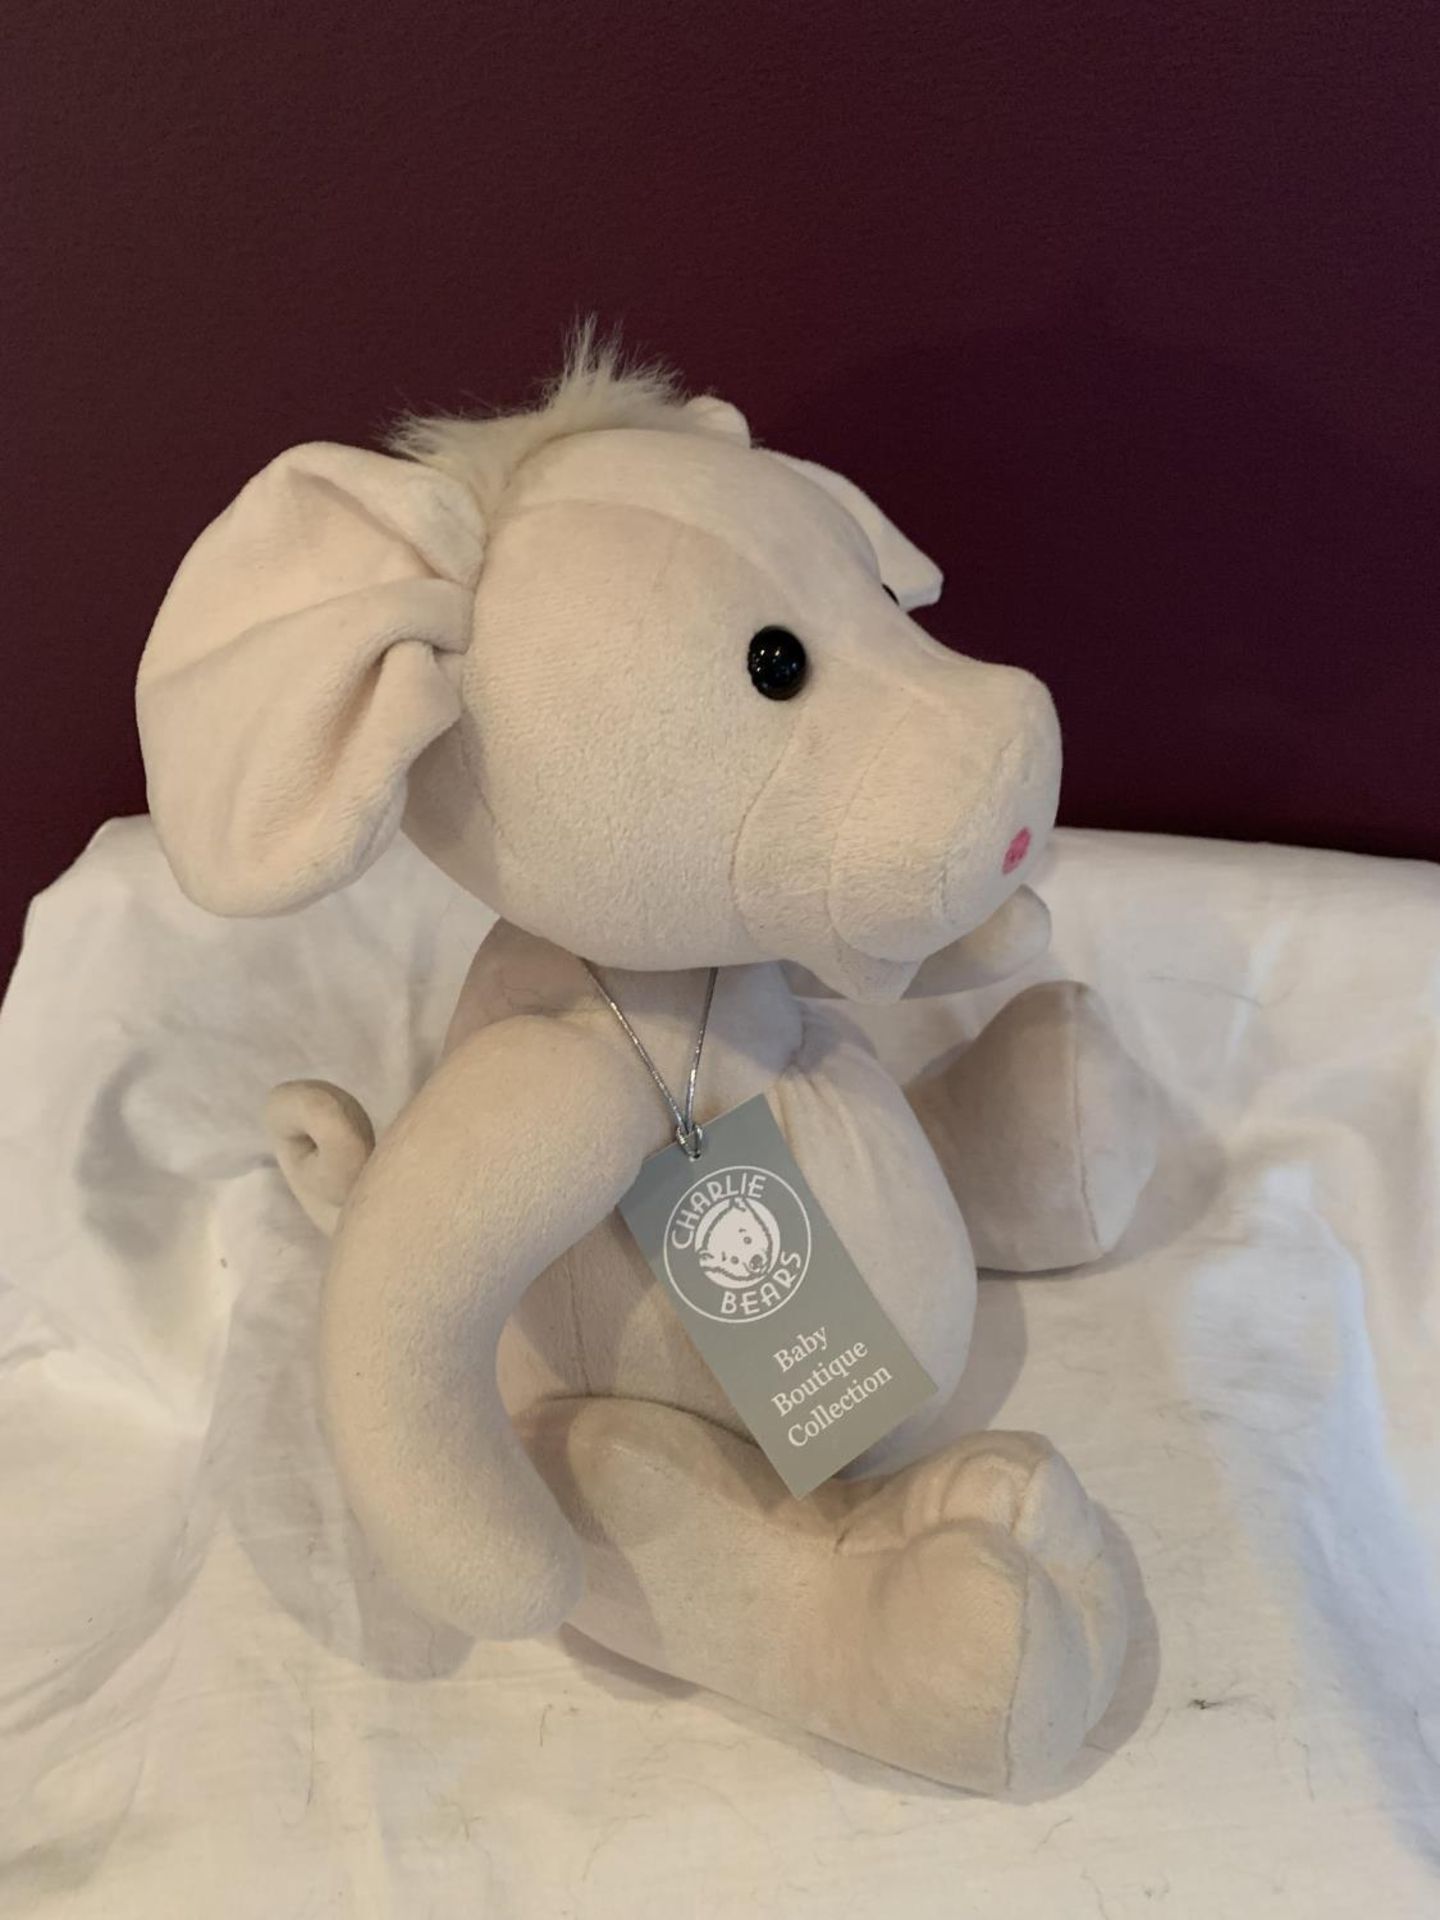 A NEW AND TAGGED CHARLIE BEARS PIG 'ANASTASIA' FROM THE BABY BOUTIQUE COLLECTION - Image 3 of 4